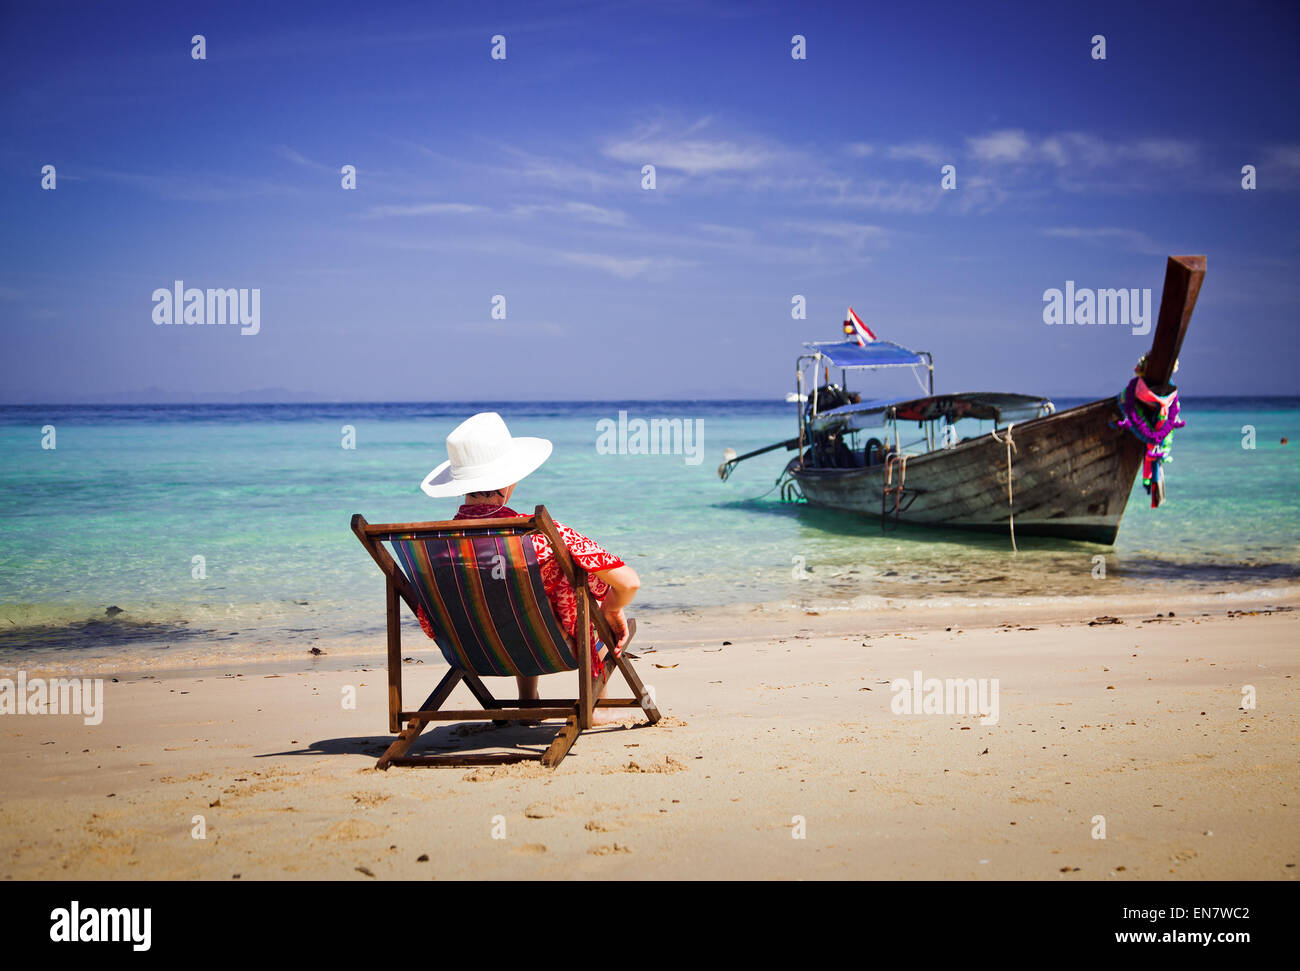 Exotic beach holiday background with beach chair and long tail boat - Thailand ocean landscape Stock Photo